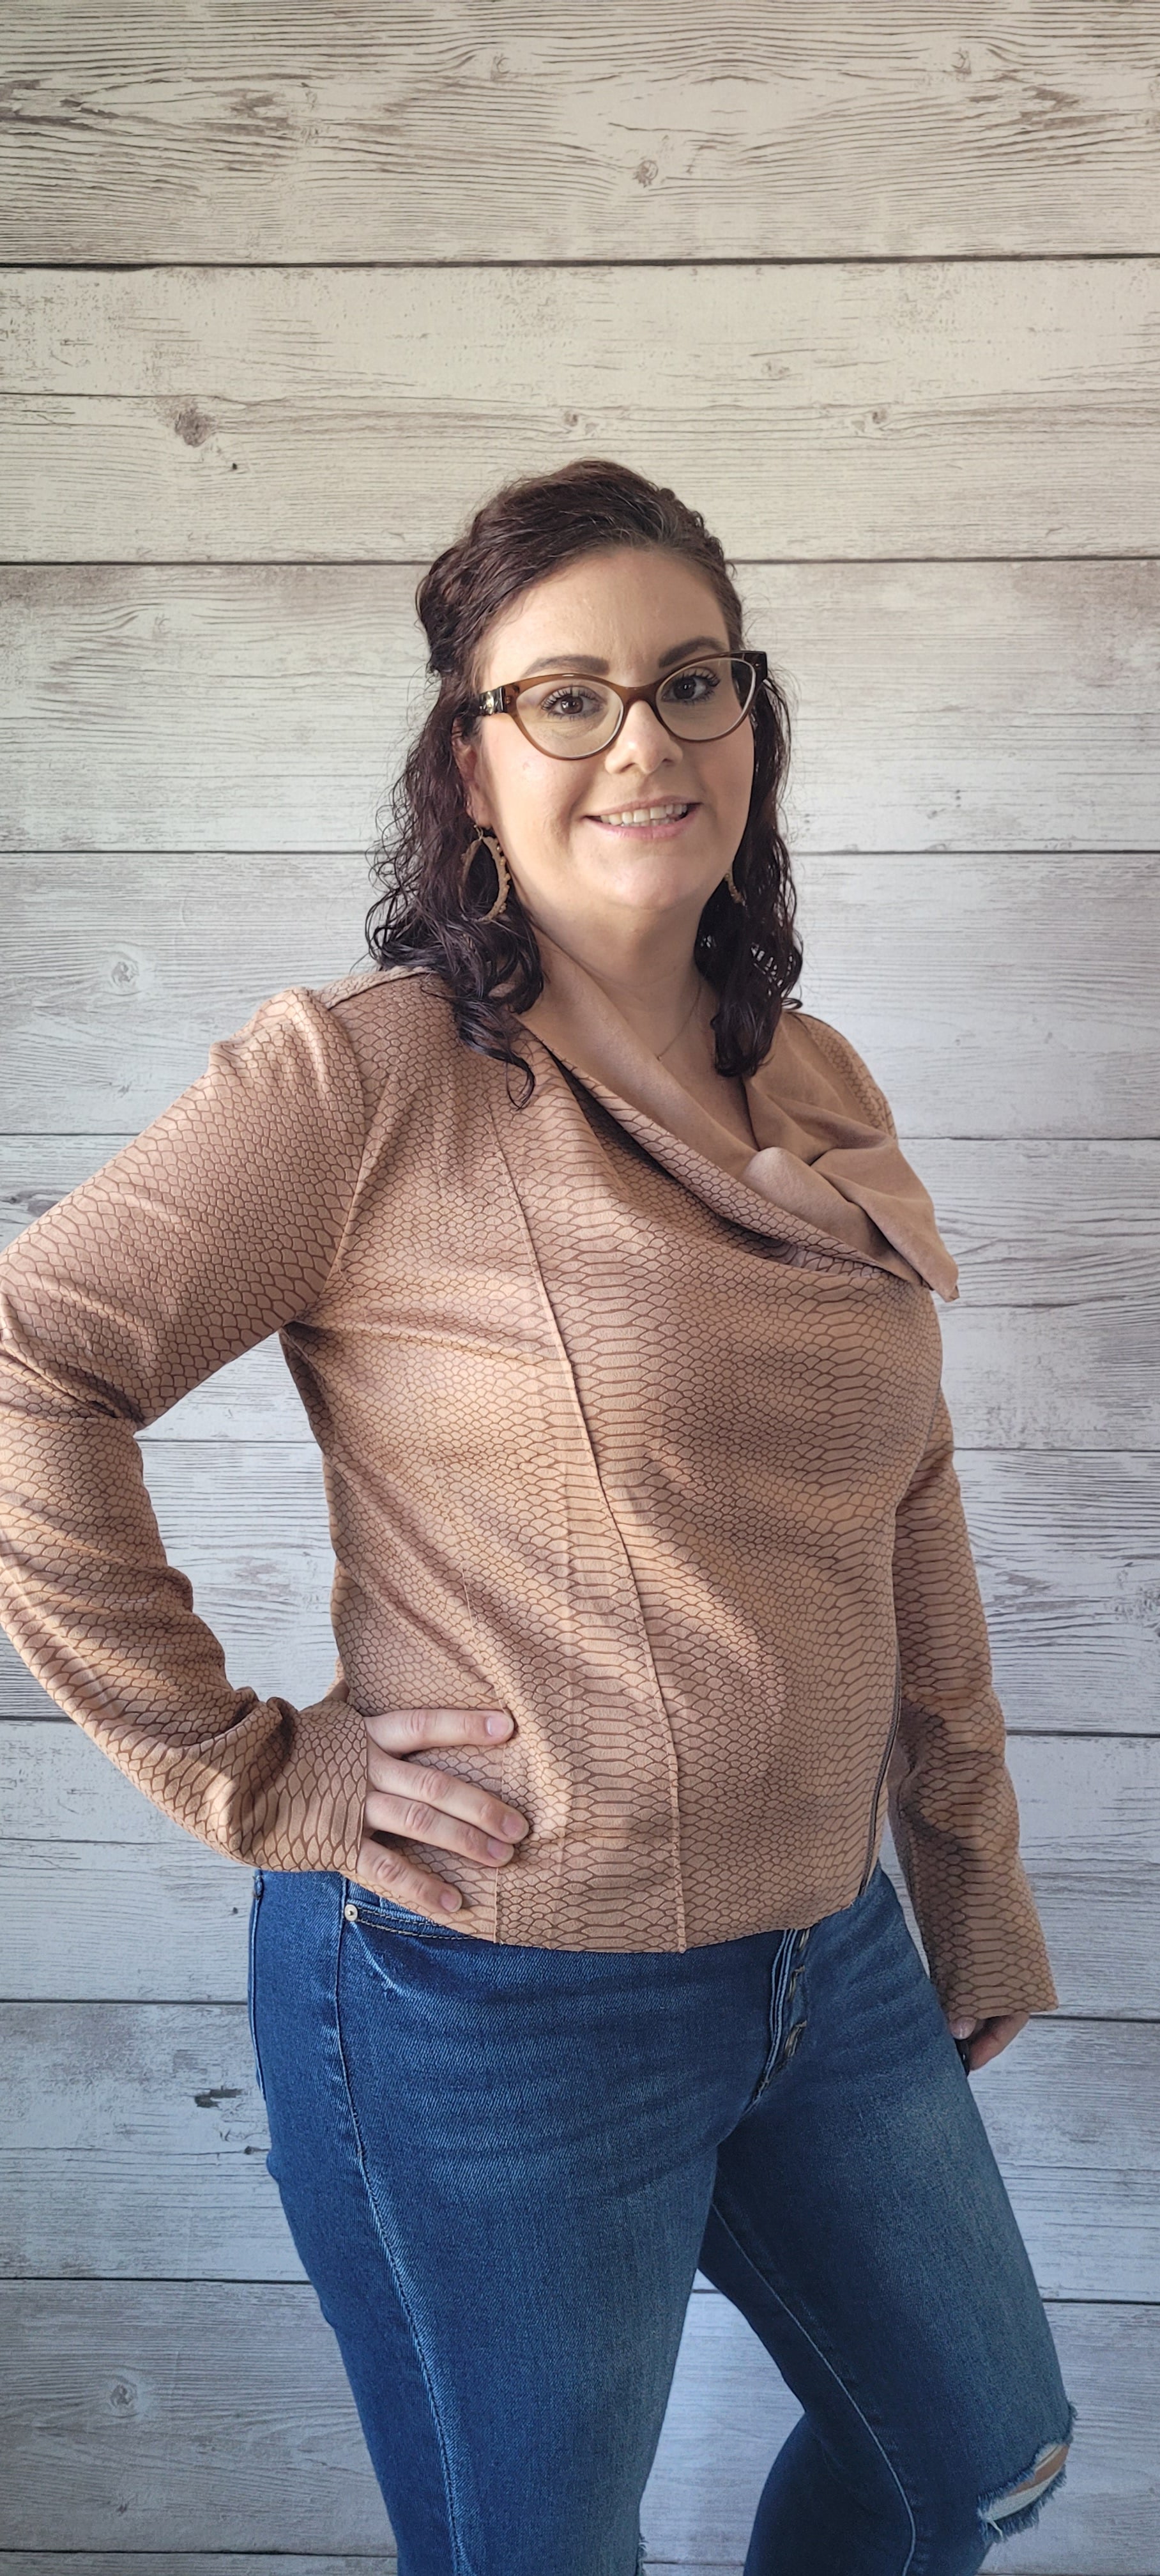 Introducing the "Athena Camel Snake Print Faux Suede Jacket"! It's lightweight and features an asymmetrical collar, so you can make a statement with your layering game. Plus, the snake print and zip-down style help you slither into fashion-forward styling. Unleash your wild side in this faux suede jacket! Sizes small through large.